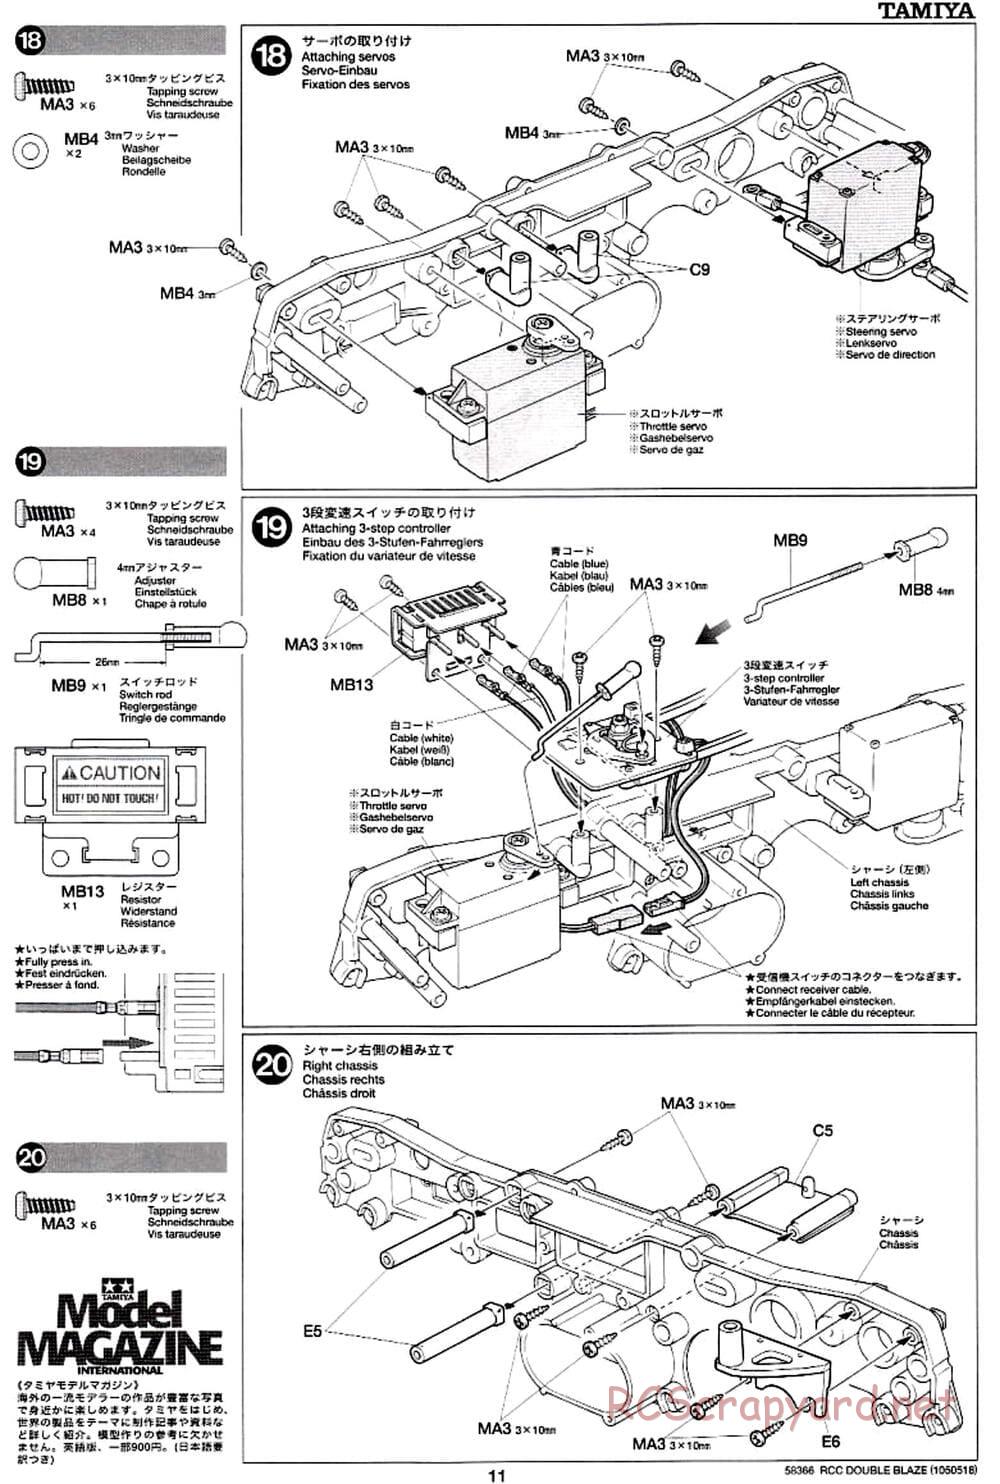 Tamiya - Double Blaze - WR-01 Chassis - Manual - Page 11